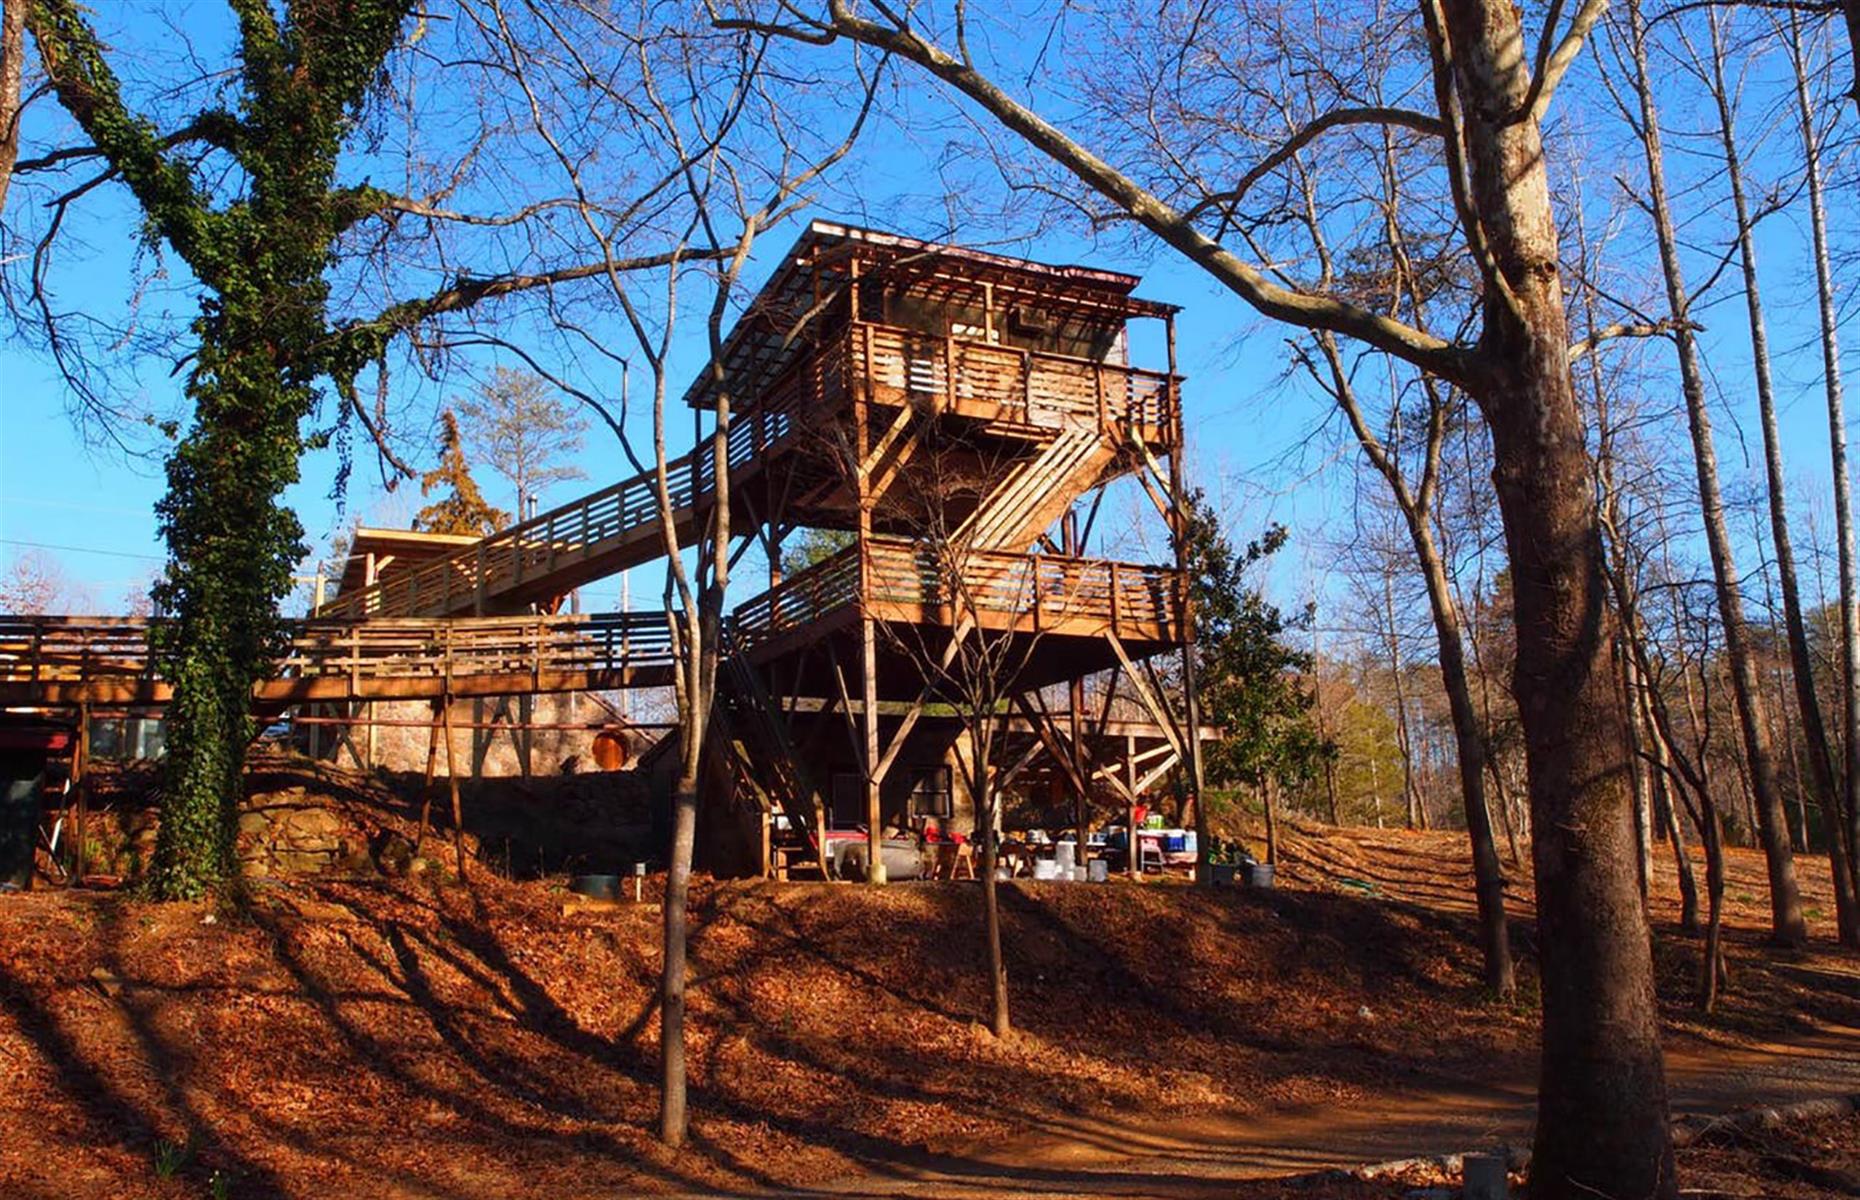 <p>Unique is an understatement when it comes to <a href="https://www.airbnb.co.uk/rooms/886469">this $125-a-night treehouse</a>. There are catwalks suspended in the air and several private and shared rooms located within the treehouse. To enhance your stay in the wild, the property owners also offer to arrange yoga classes, a massage therapist and a tour of the nearby Mulberry organic farm – check with the hosts for current availability.</p>